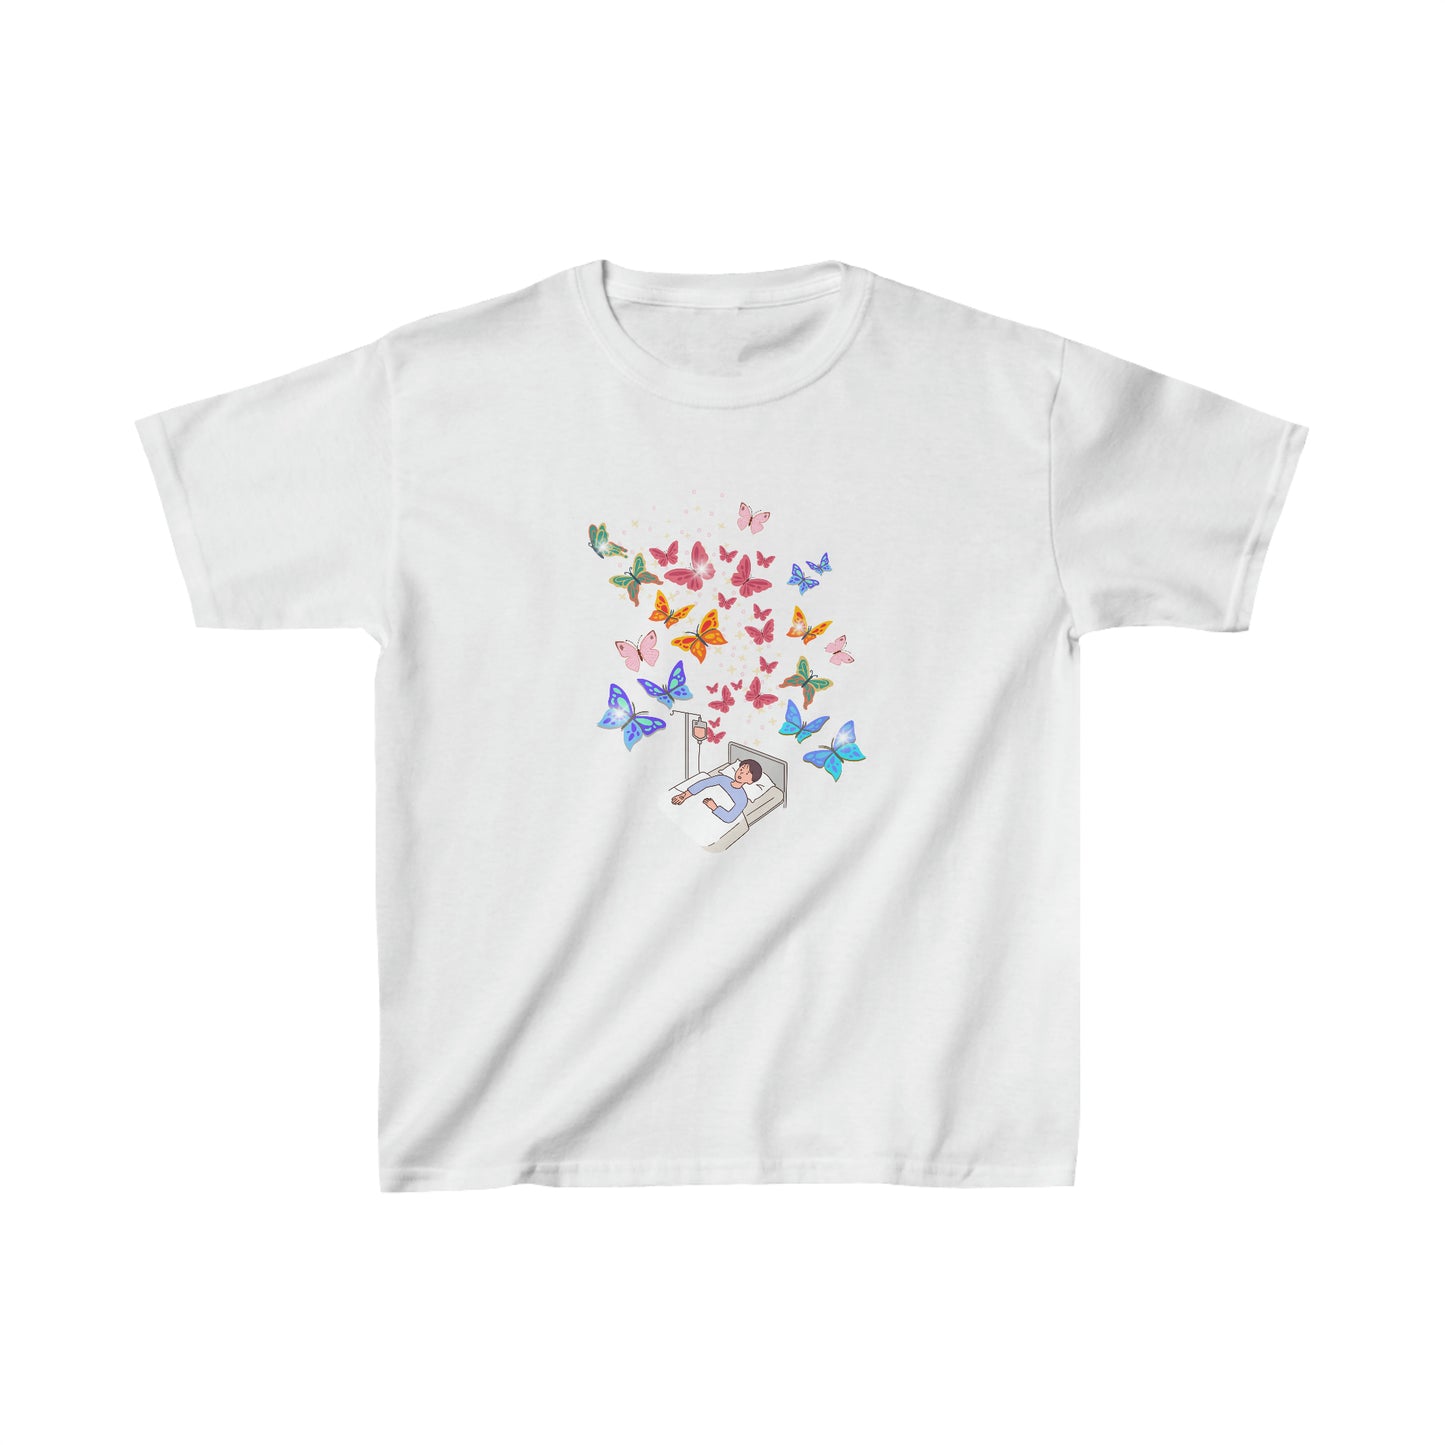 T-shirt for the benefit of the Sainte-Justine foundation - child